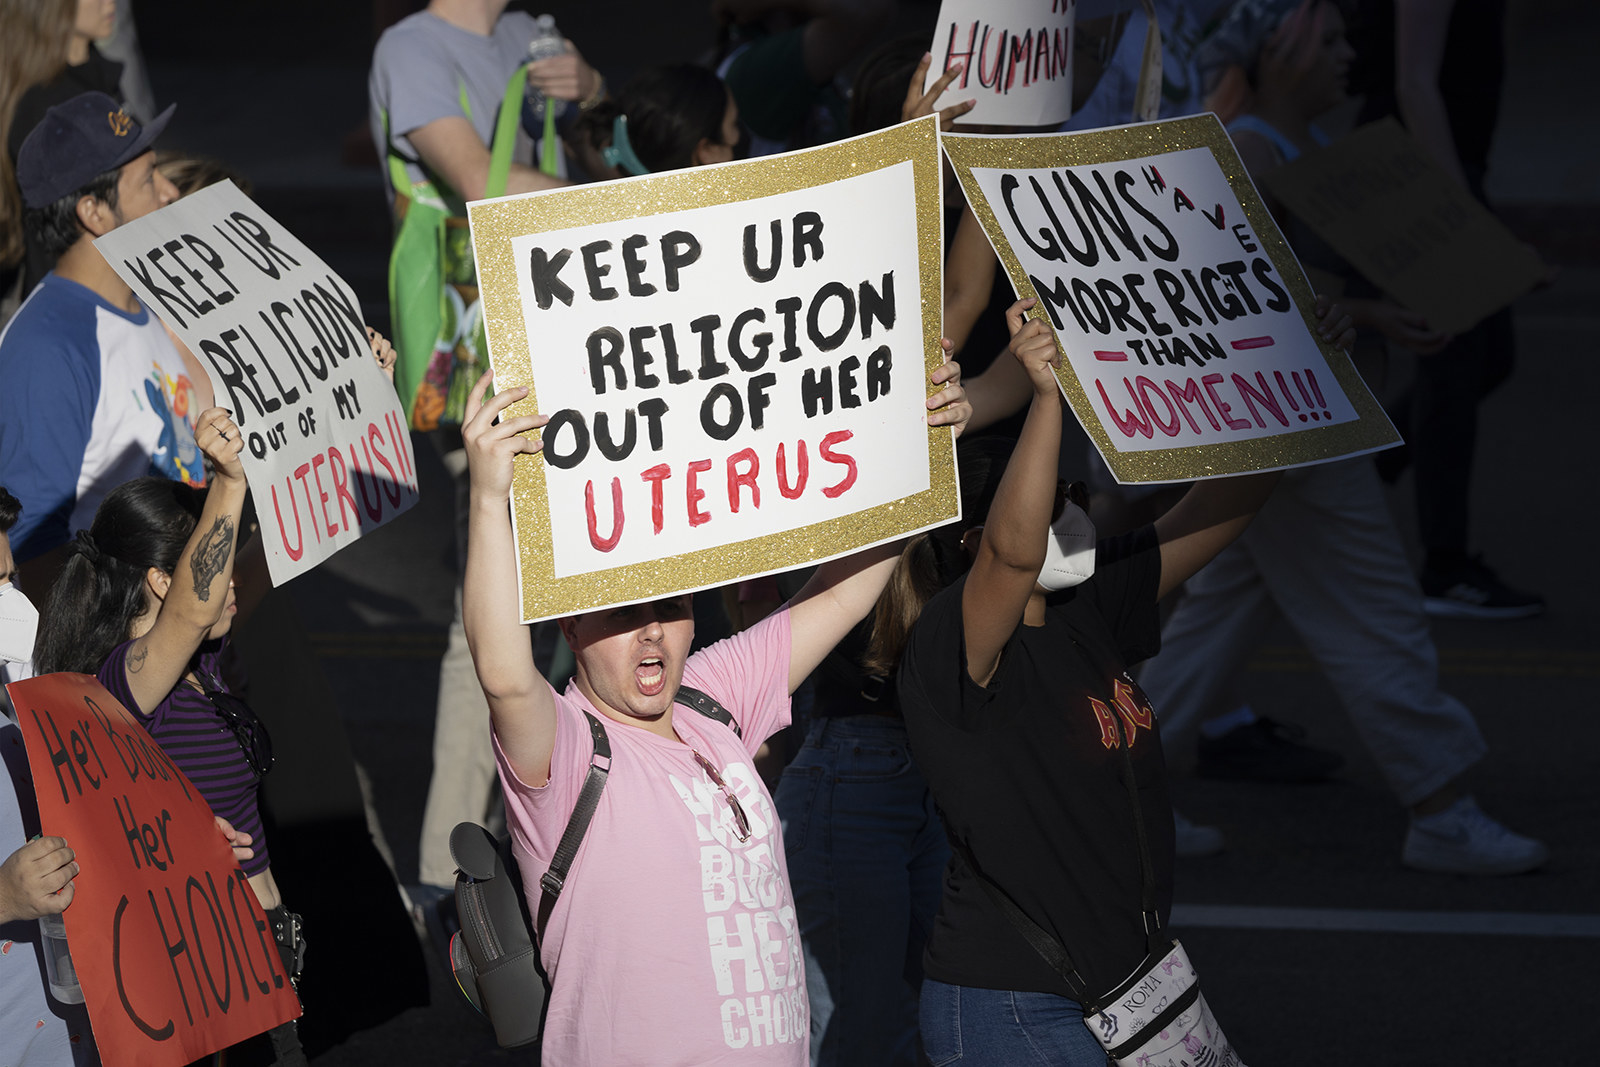 People march and hold up signs, including &quot;Keep ur religion out of her uterus&quot;